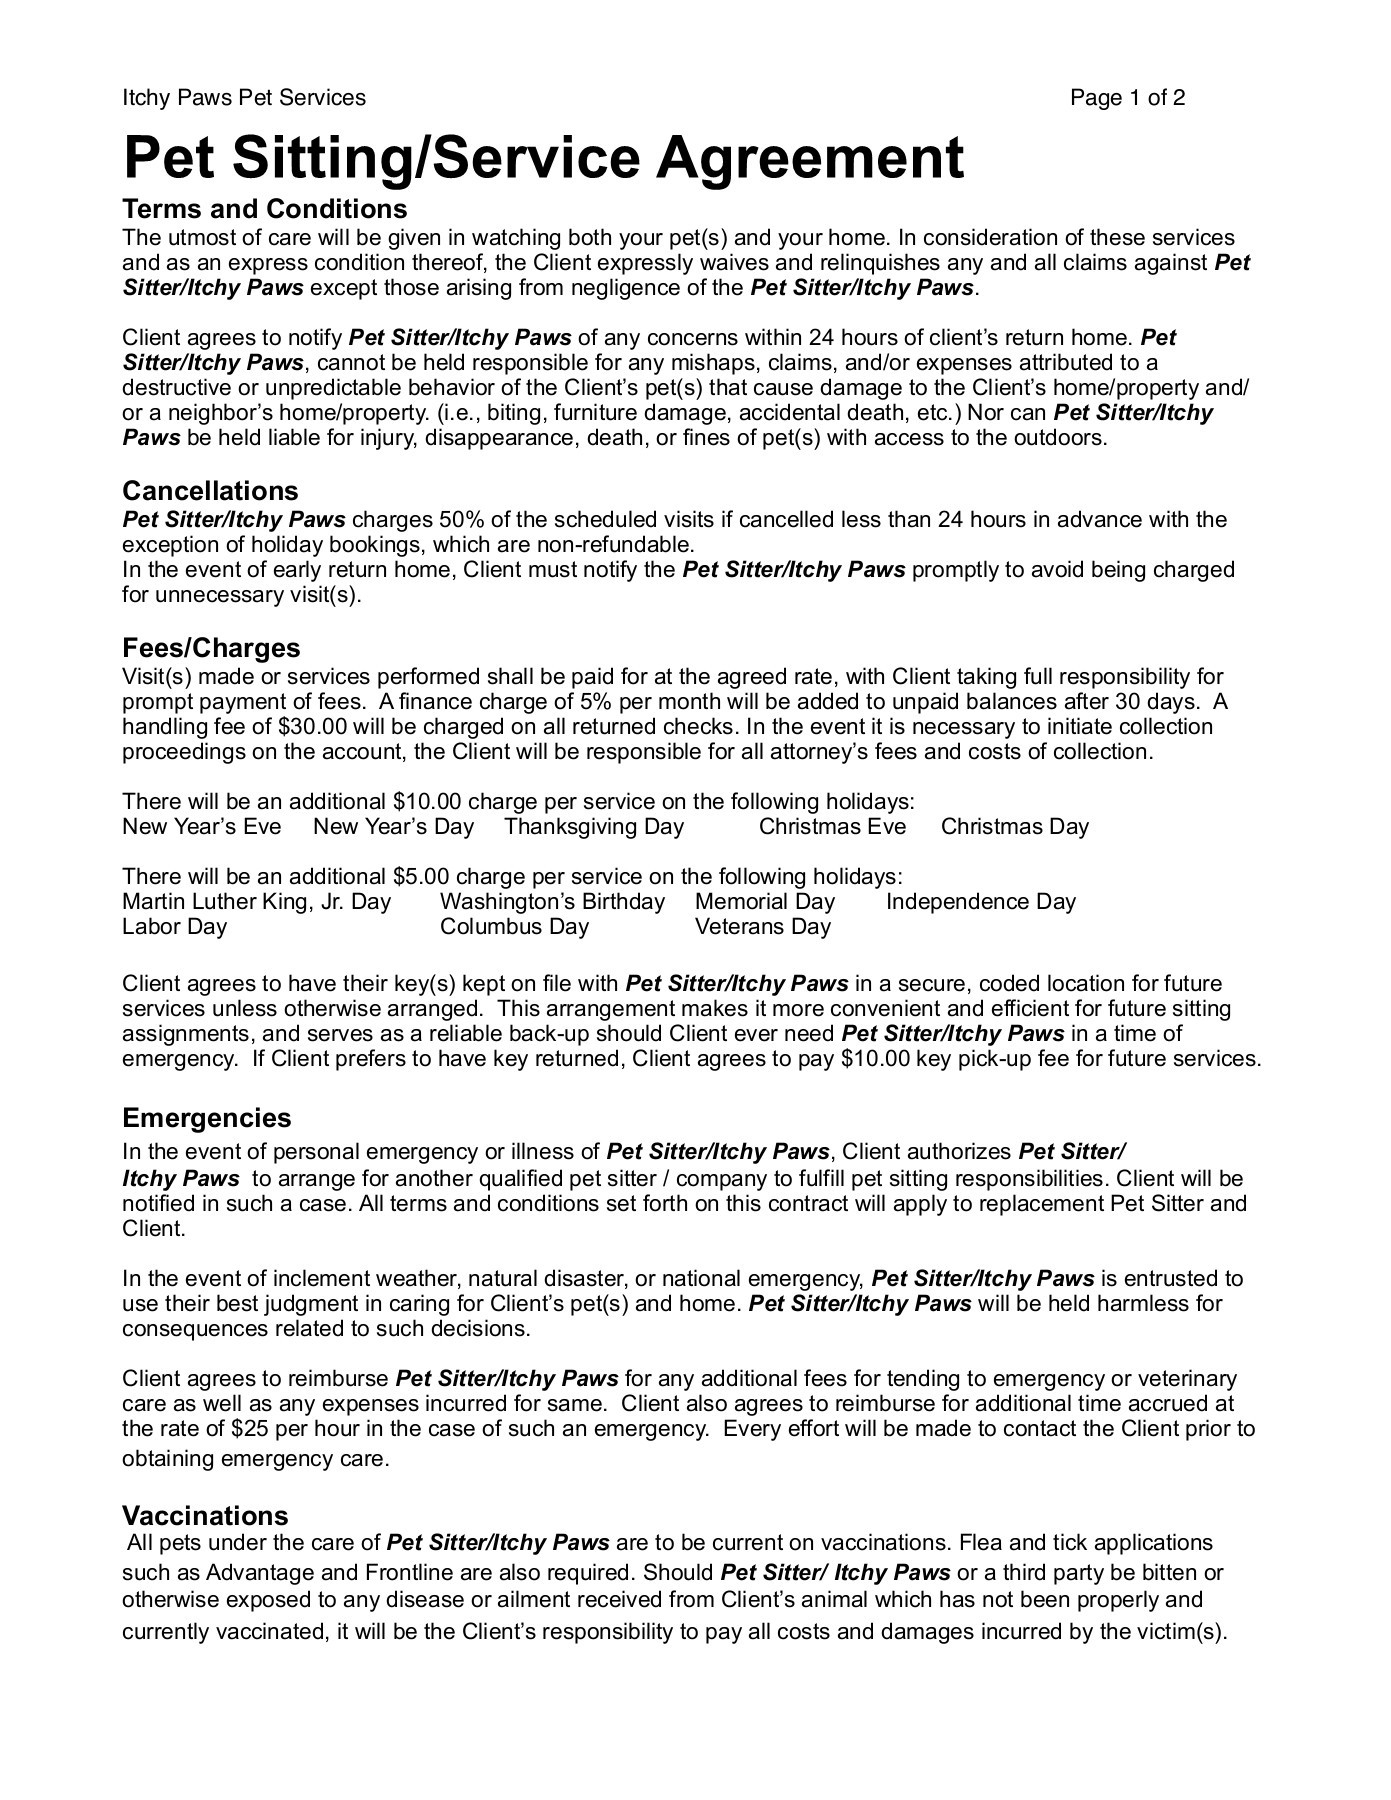 Service Agreement Terms And Conditions Page 1 Of 2 Pet Sittingservice Agreement Fliphtml5